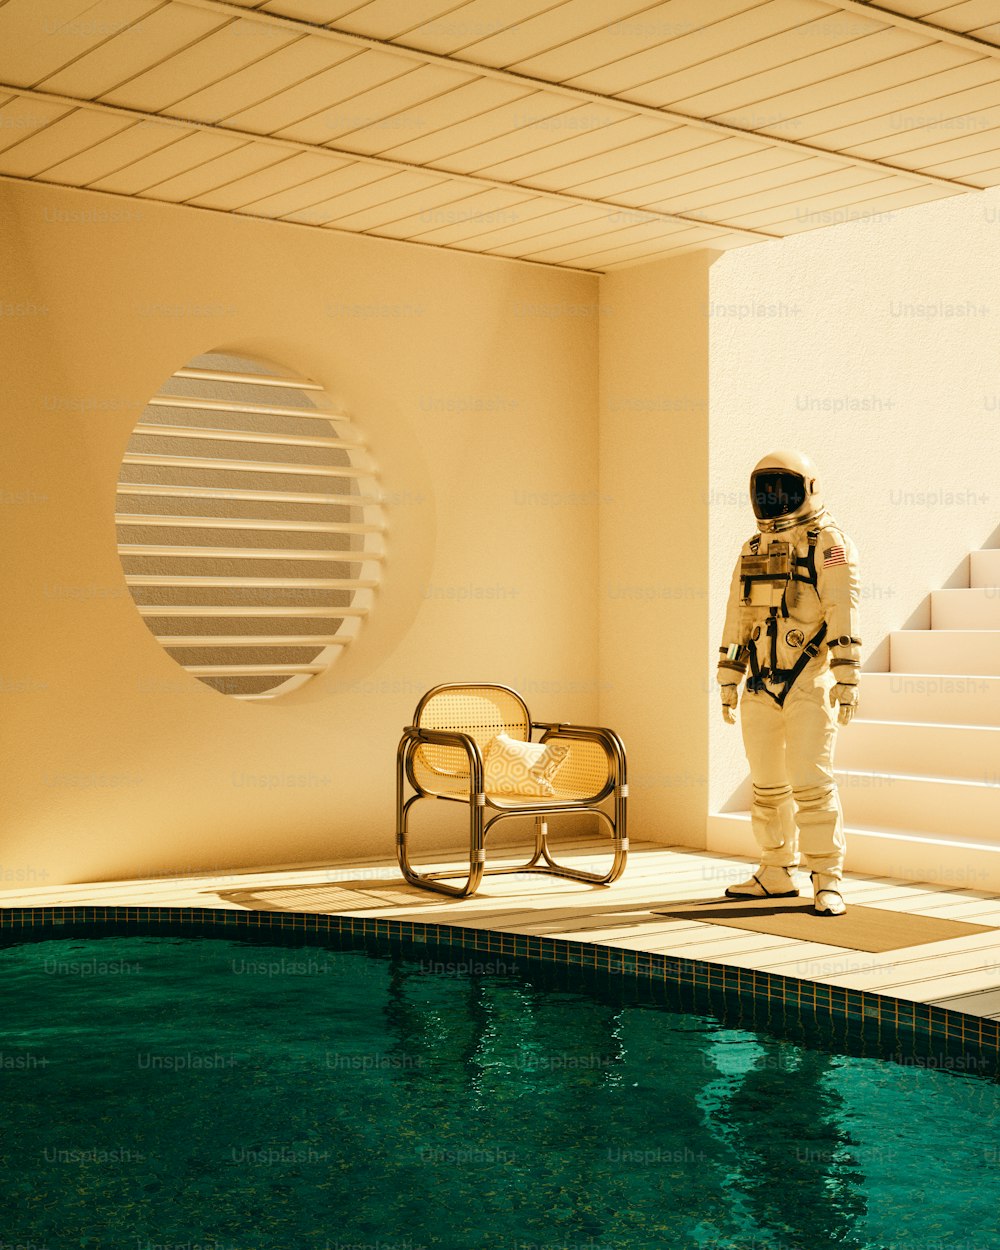 a man in a space suit standing next to a pool